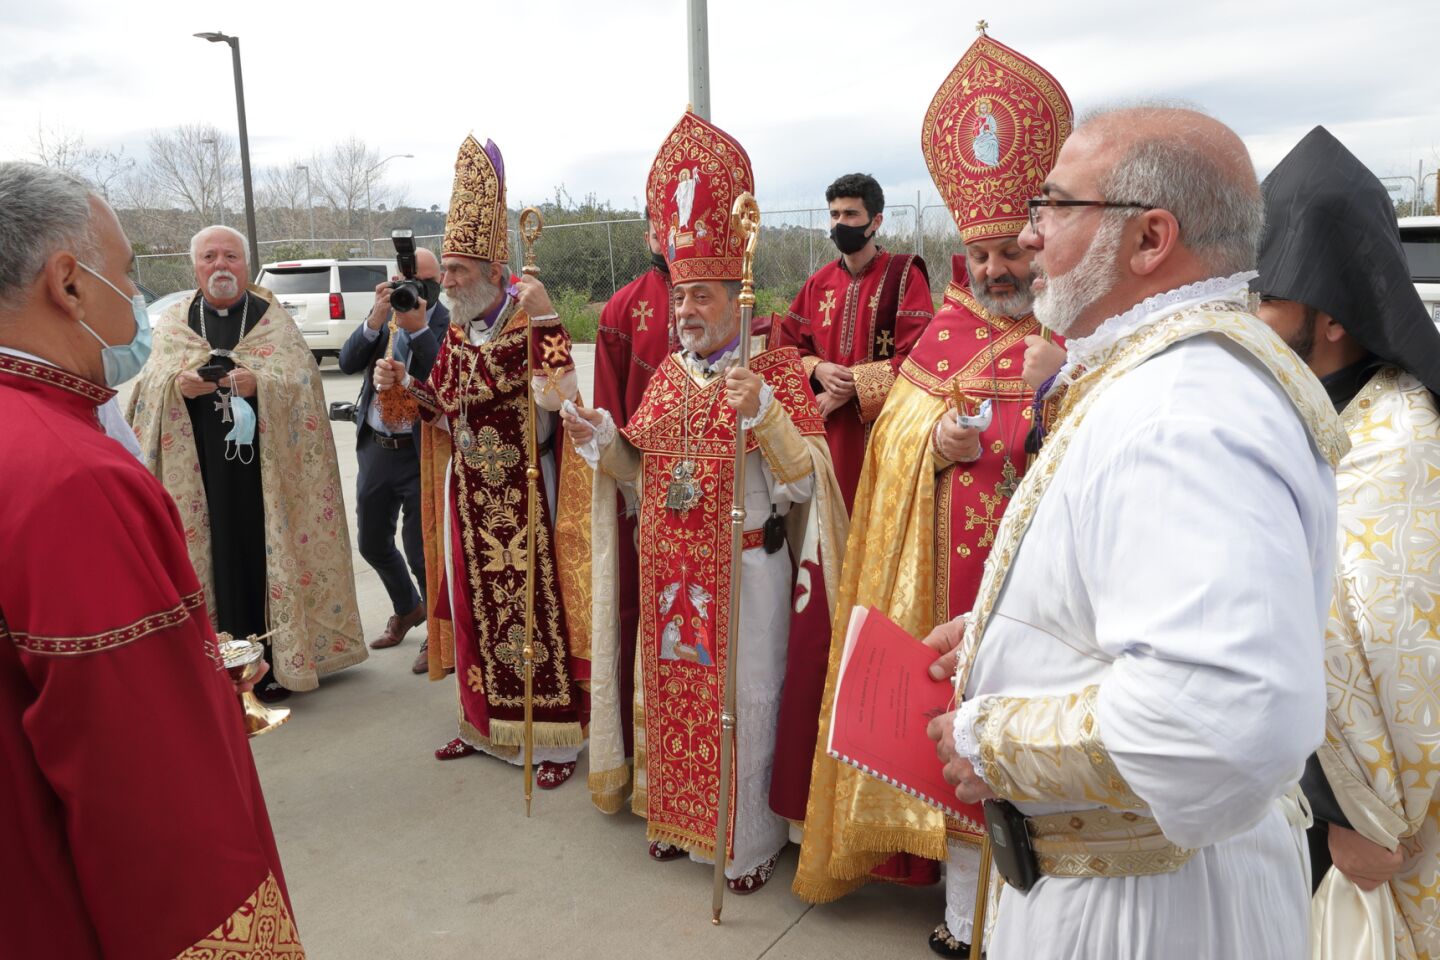 Father Moushegh Tashjian (Founding Pastor St. Mary Armenian Church, Costa Mesa), Archbishop Barkev Martirosyan (Former Primate of Artsakh, Armenia), Archbishop Hovnan Derderian (Primate, Western Diocese of Armenian Church), Bishop Bagrat Galastanyan (Primate of the Diocese of Tavush, Armenia), and Father Pakrad Berejekian (Parish Priest, far right in white robe) prepare to preside over the consecration and church naming ceremony at the new Armenian Church in San Diego.